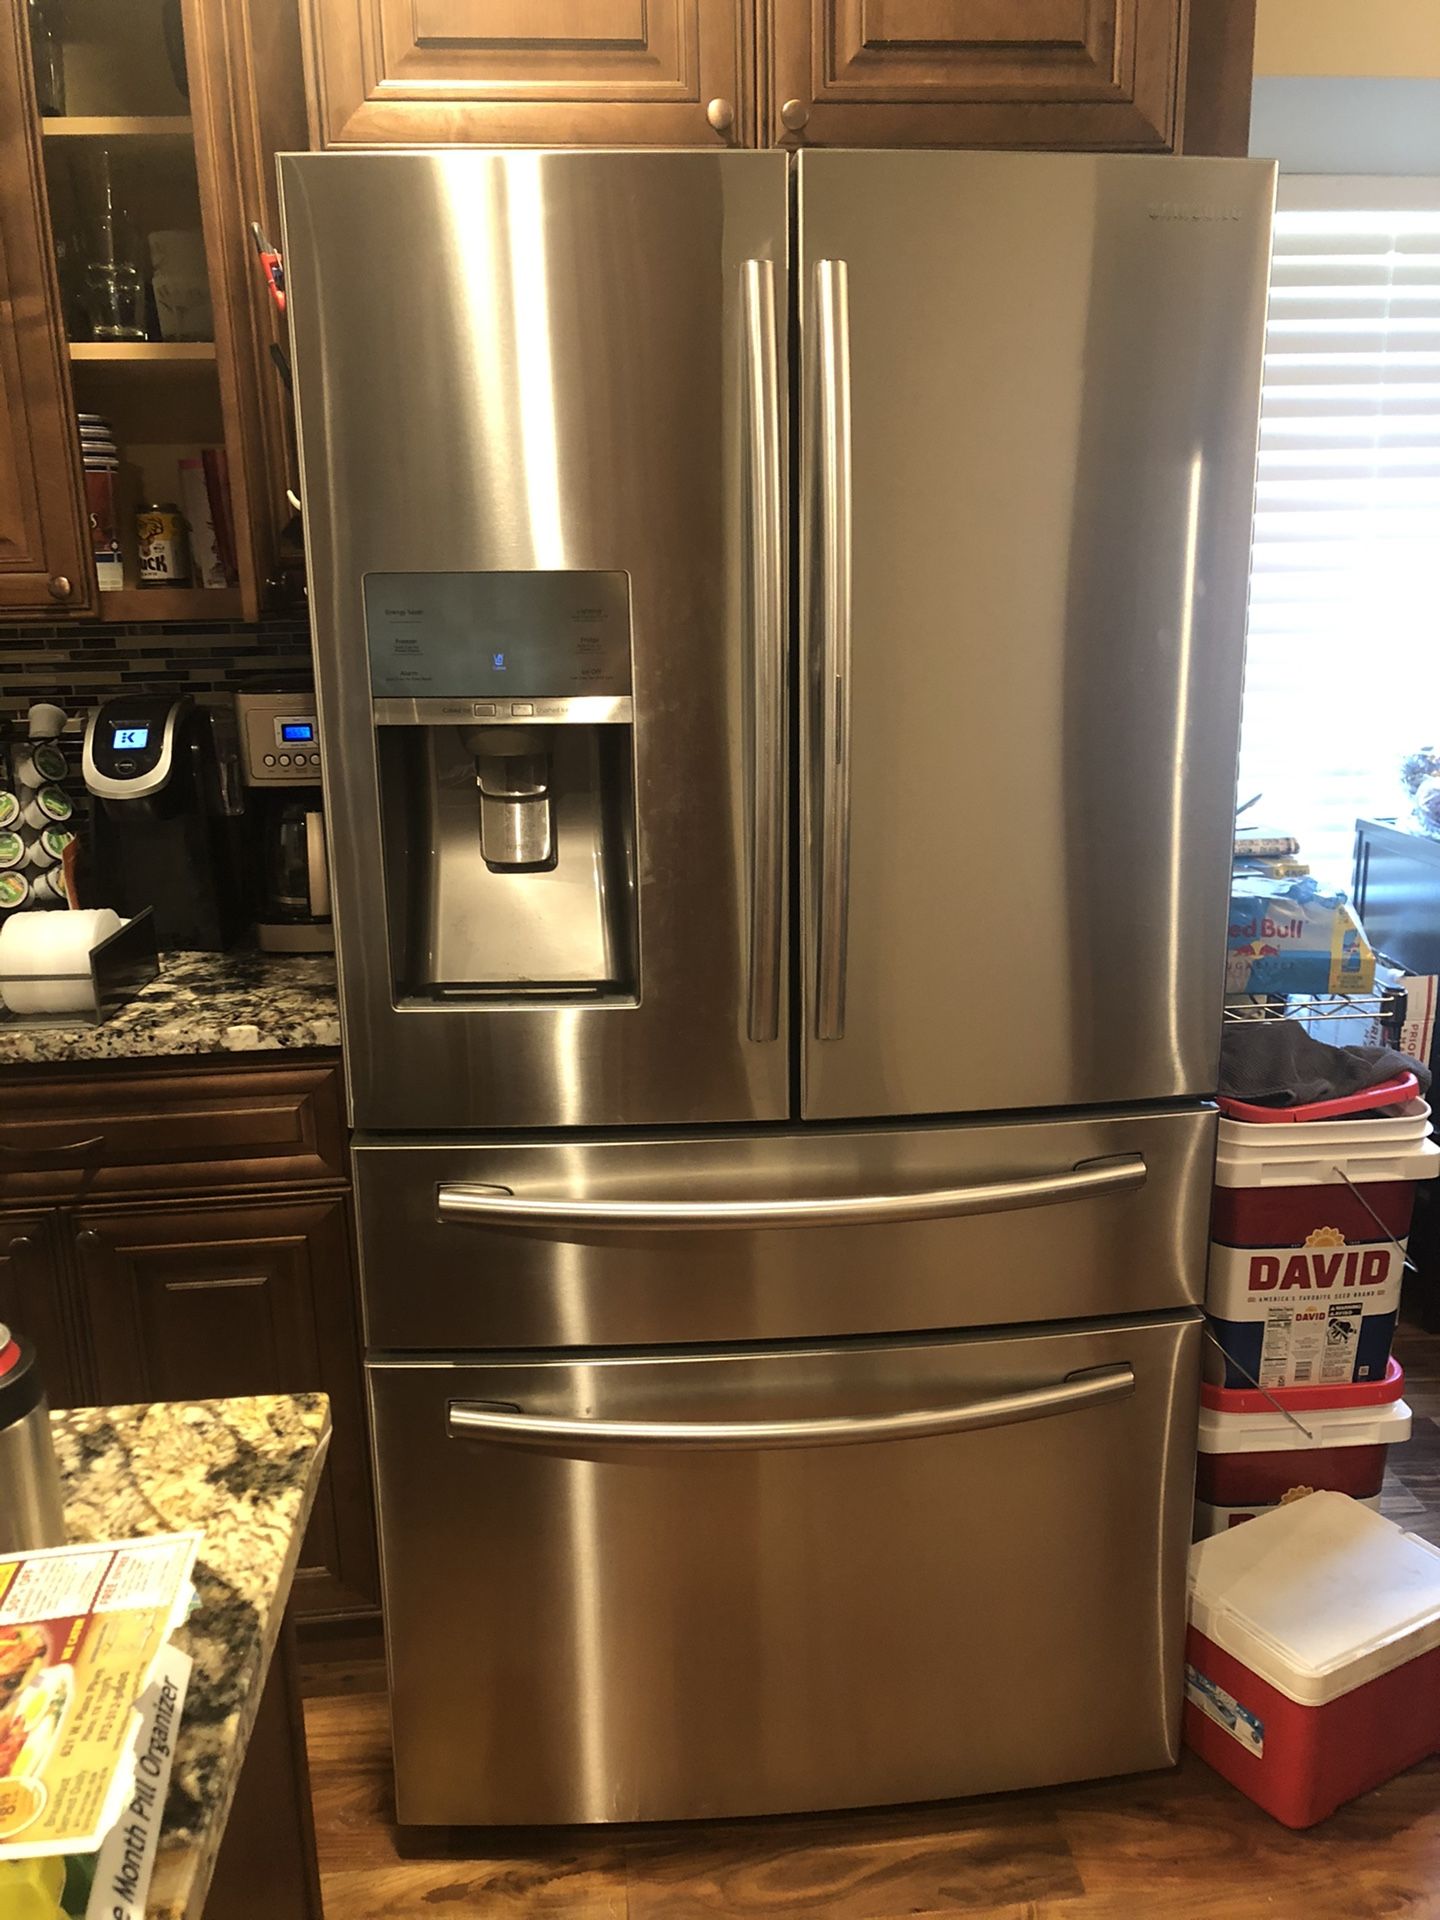 Nice Samsung 30 cubic foot stainless refrigerator 3 years old